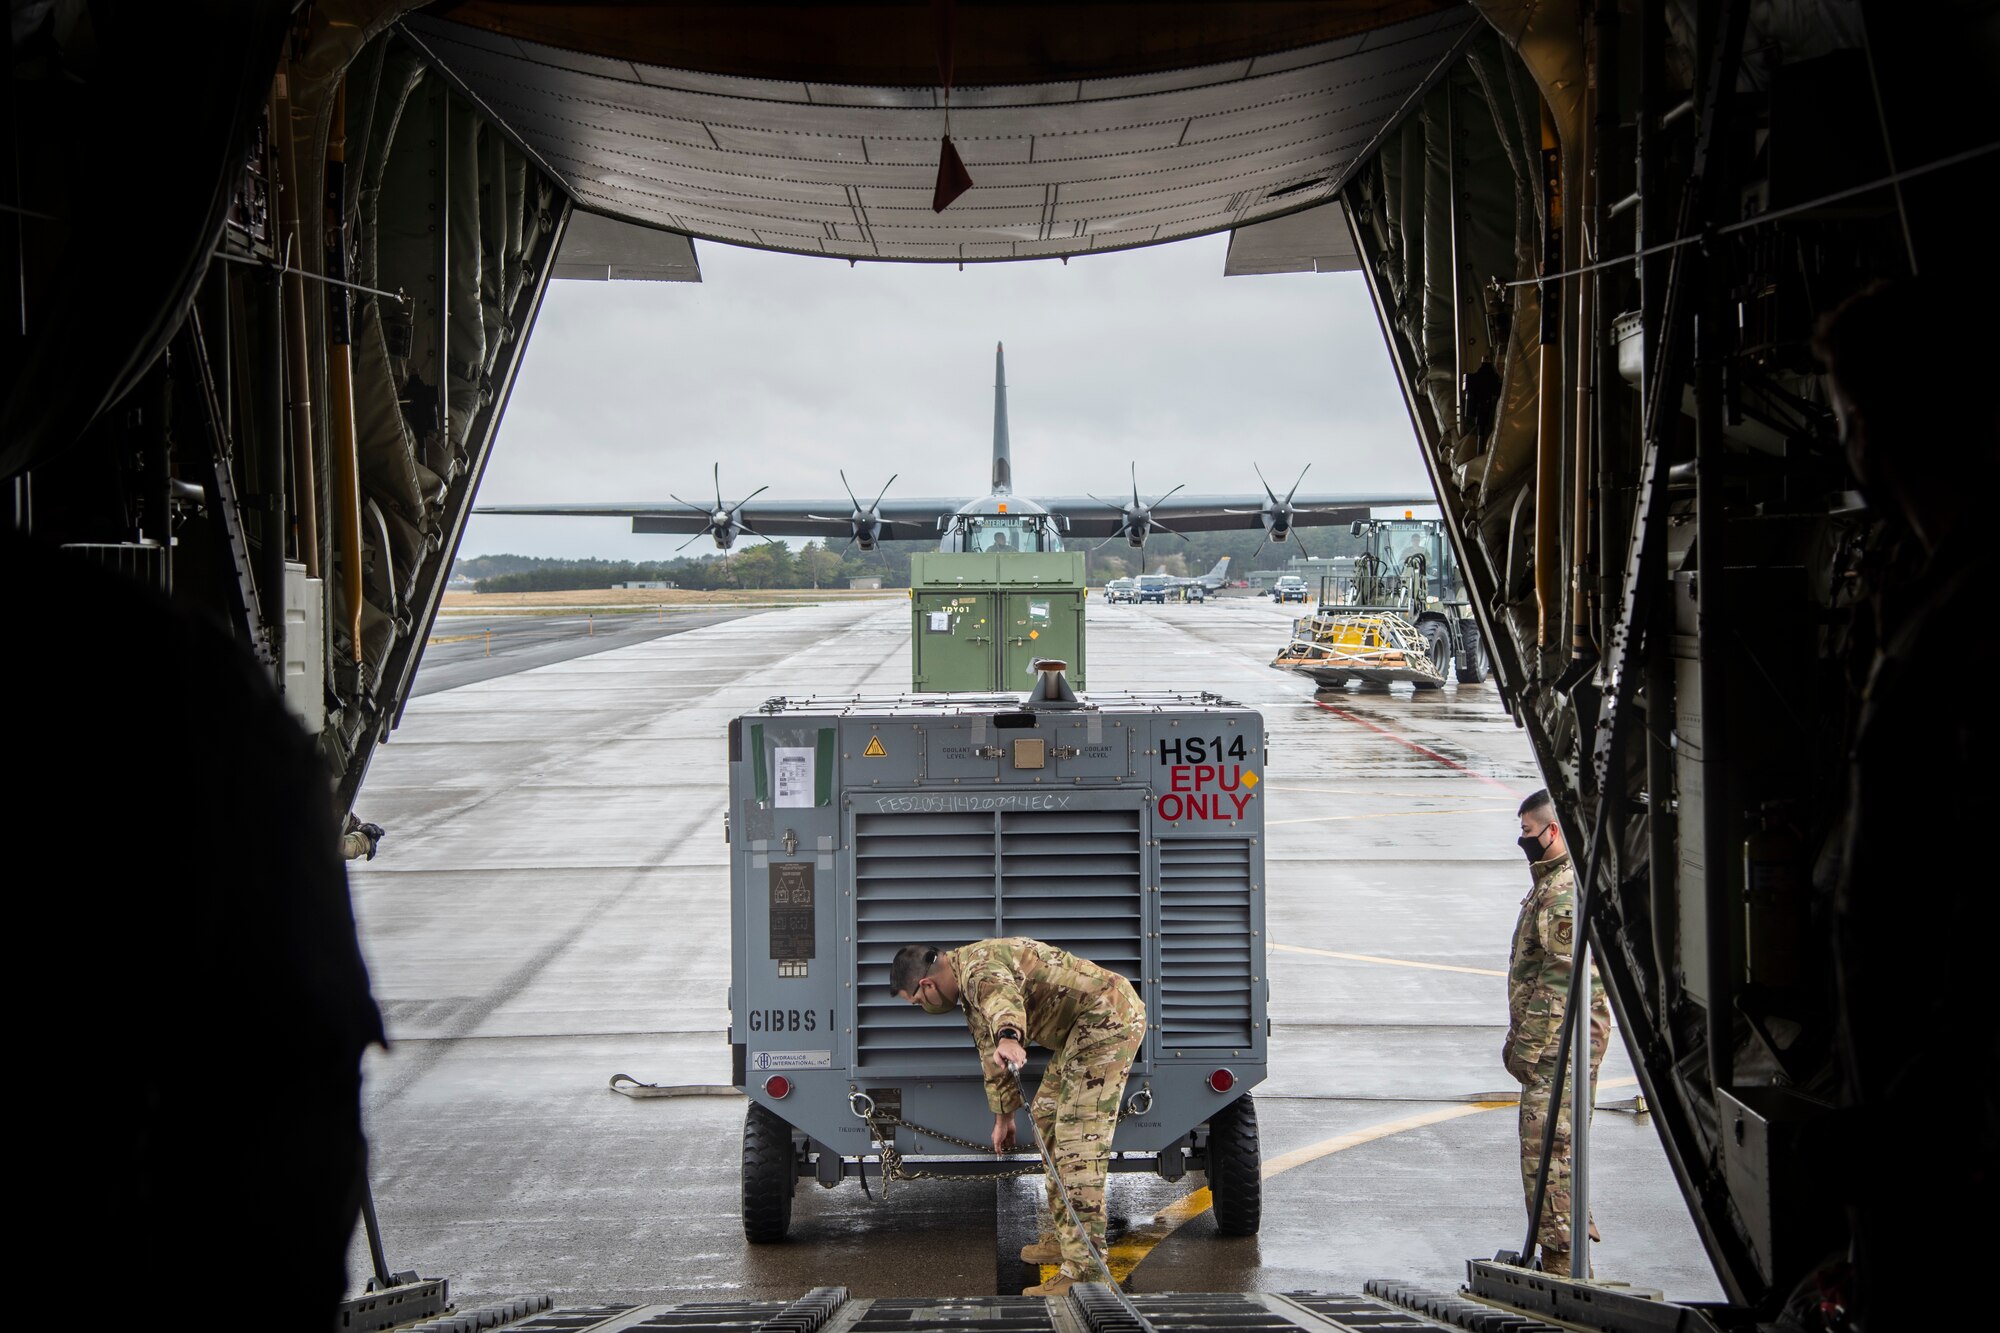 A U.S. Air Force Airman loads cargo onto a C-130J Super Hercules from the 374th Airlift Wing during the Beverly Sunrise 21-05 Readiness Exercise at Misawa Air Base, Japan, May 2, 2021. The C-130s are transporting cargo and personnel to support the 35th Fighter Wing’s Agile Combat Employment capabilities. (U.S. Air Force photo by Airman 1st Class China M. Shock)